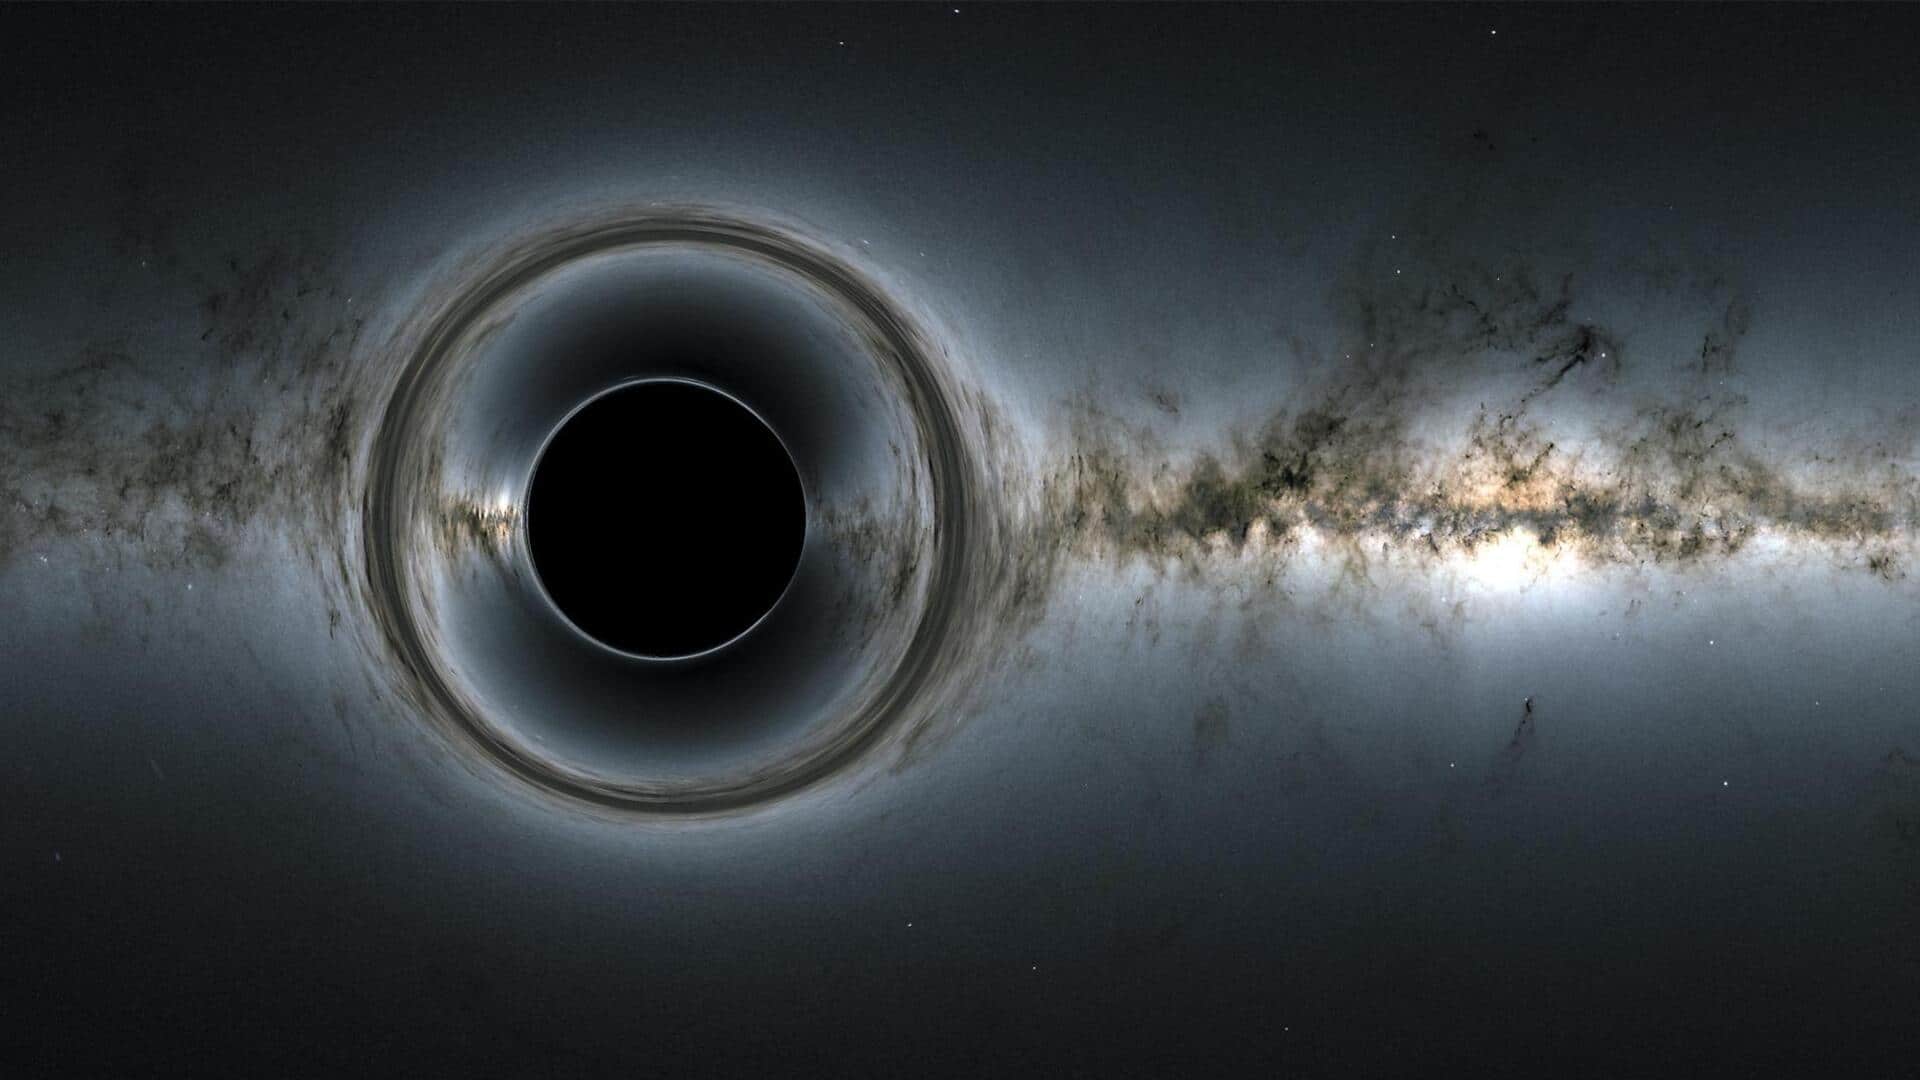 Black holes may be hiding just 150 light-years from Earth